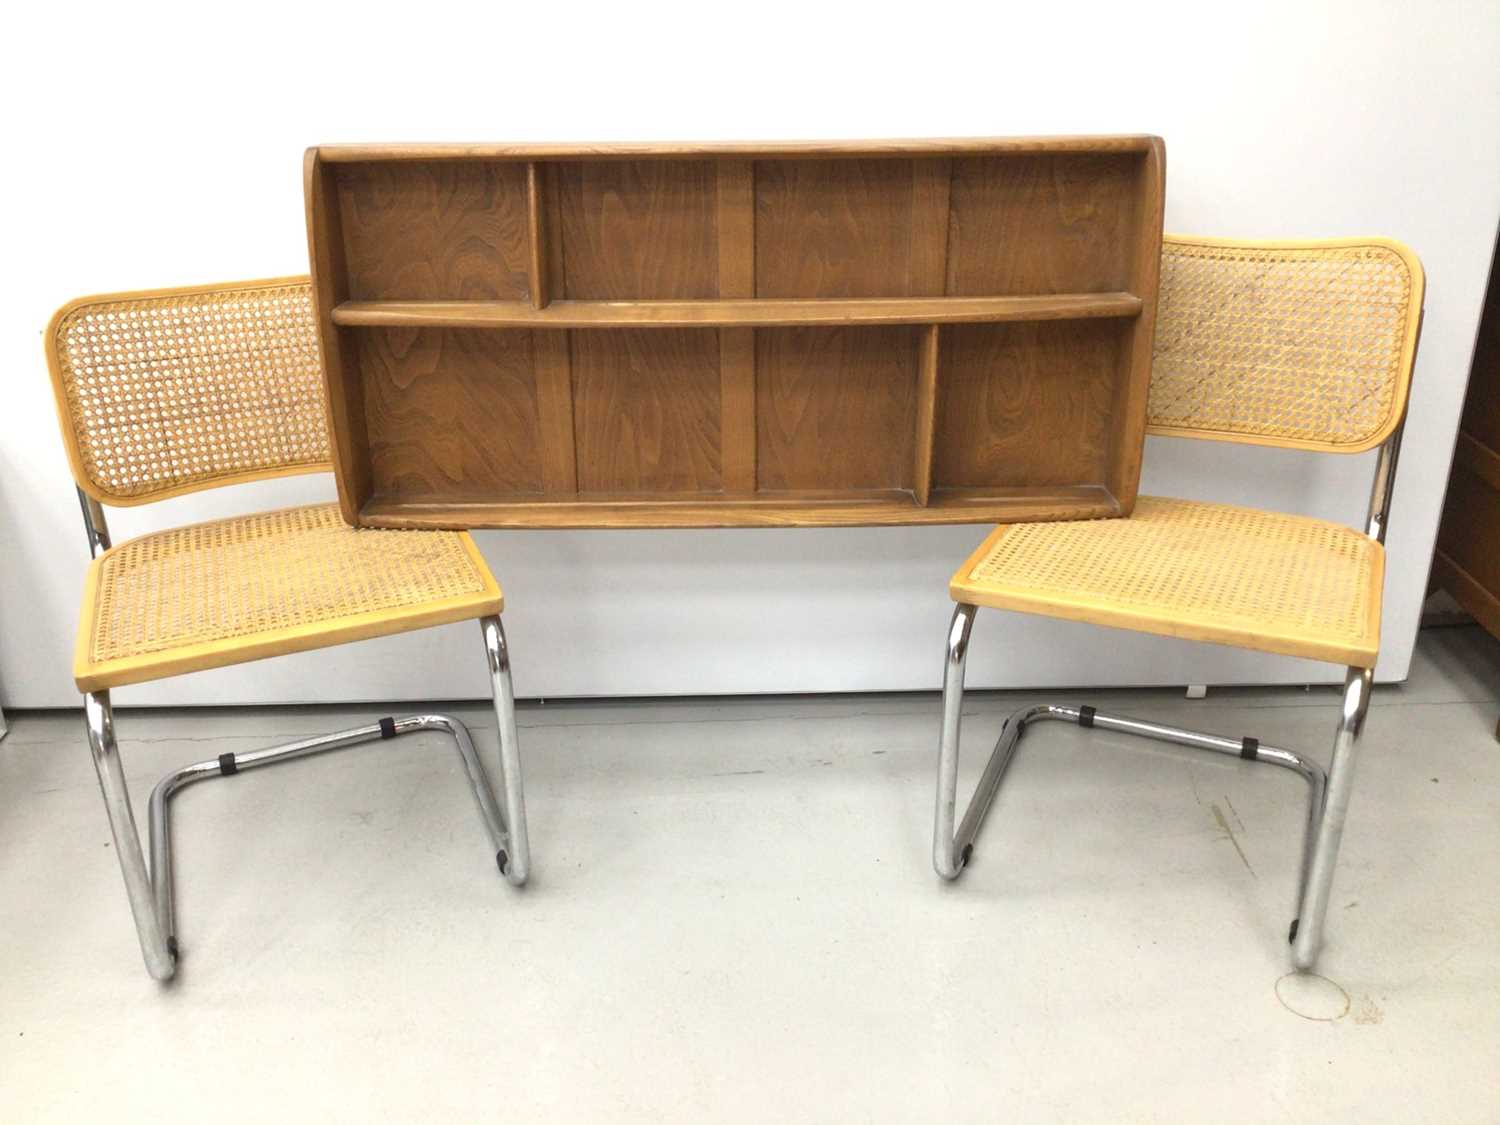 Lot 12 - Ercol golden dawn wall hanging shelves, together with a pair of Italian chrome and caned S-form chairs